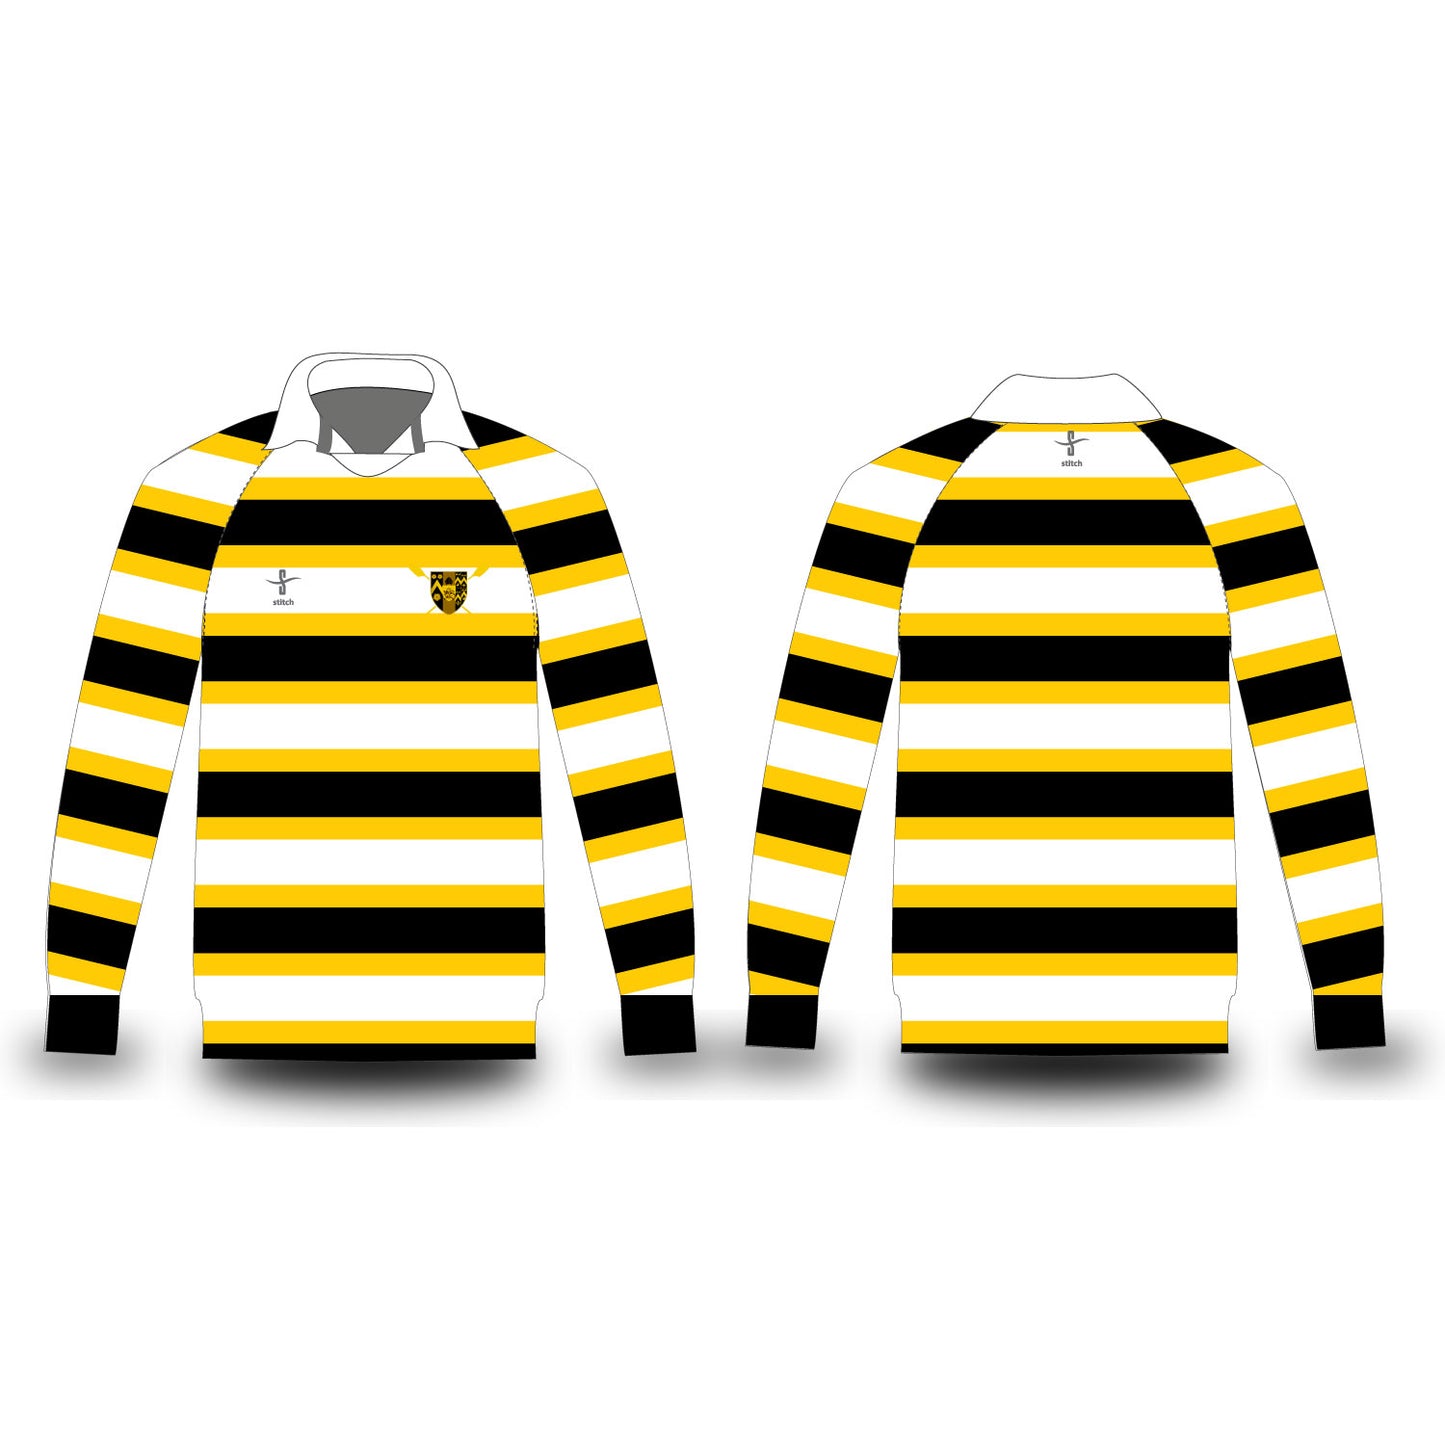 Brasenose College Rugby Shirt Option 1